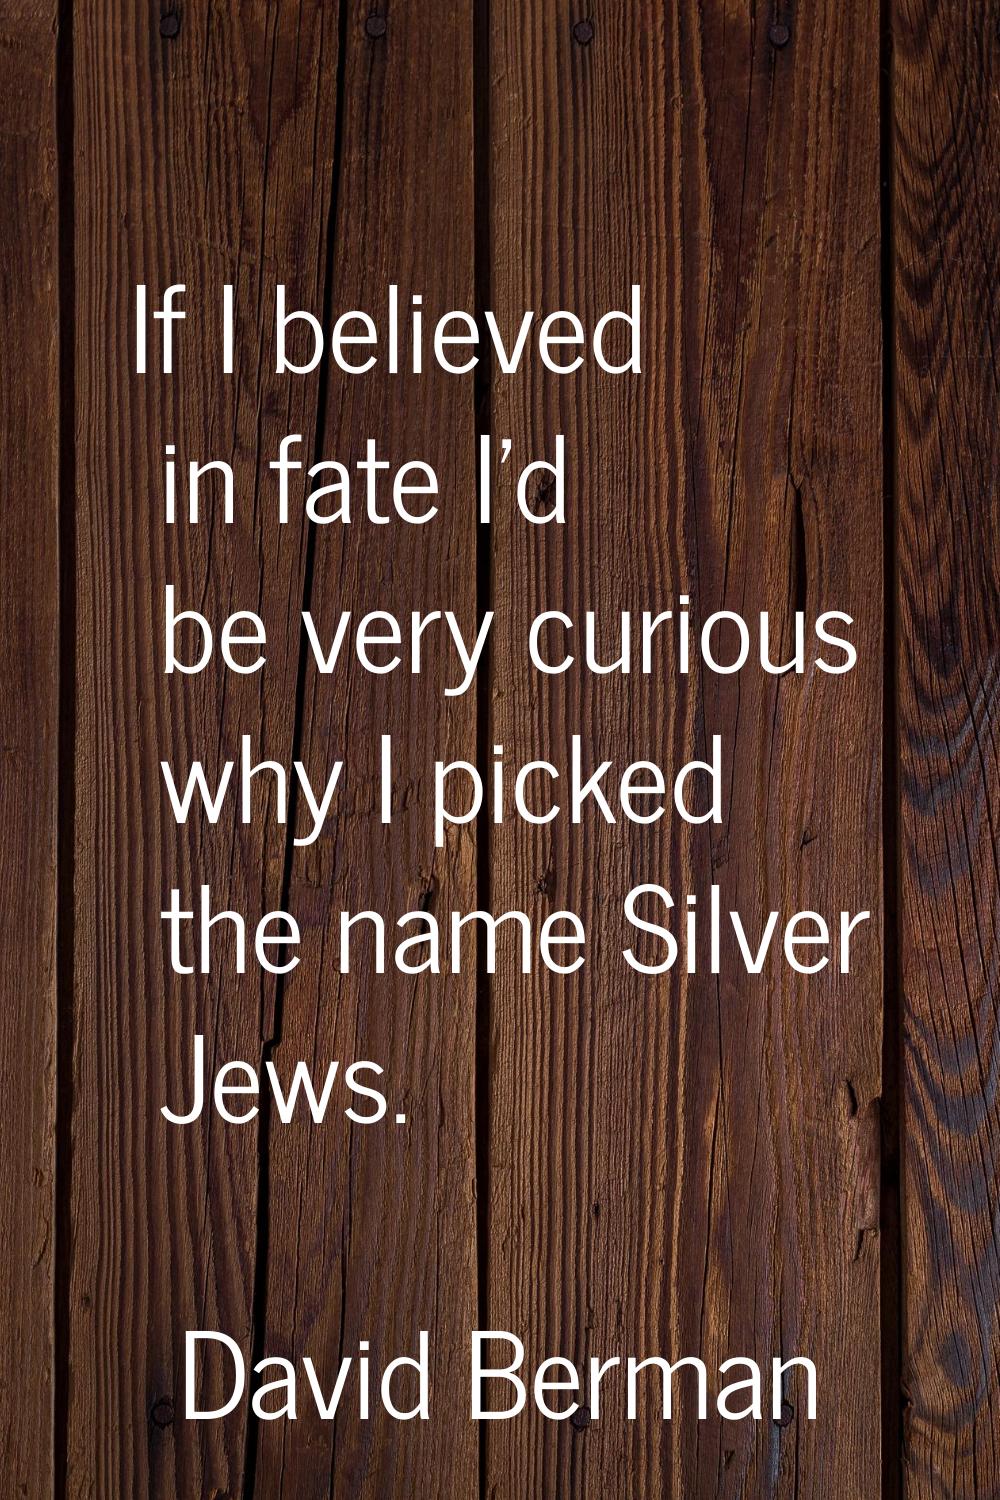 If I believed in fate I'd be very curious why I picked the name Silver Jews.